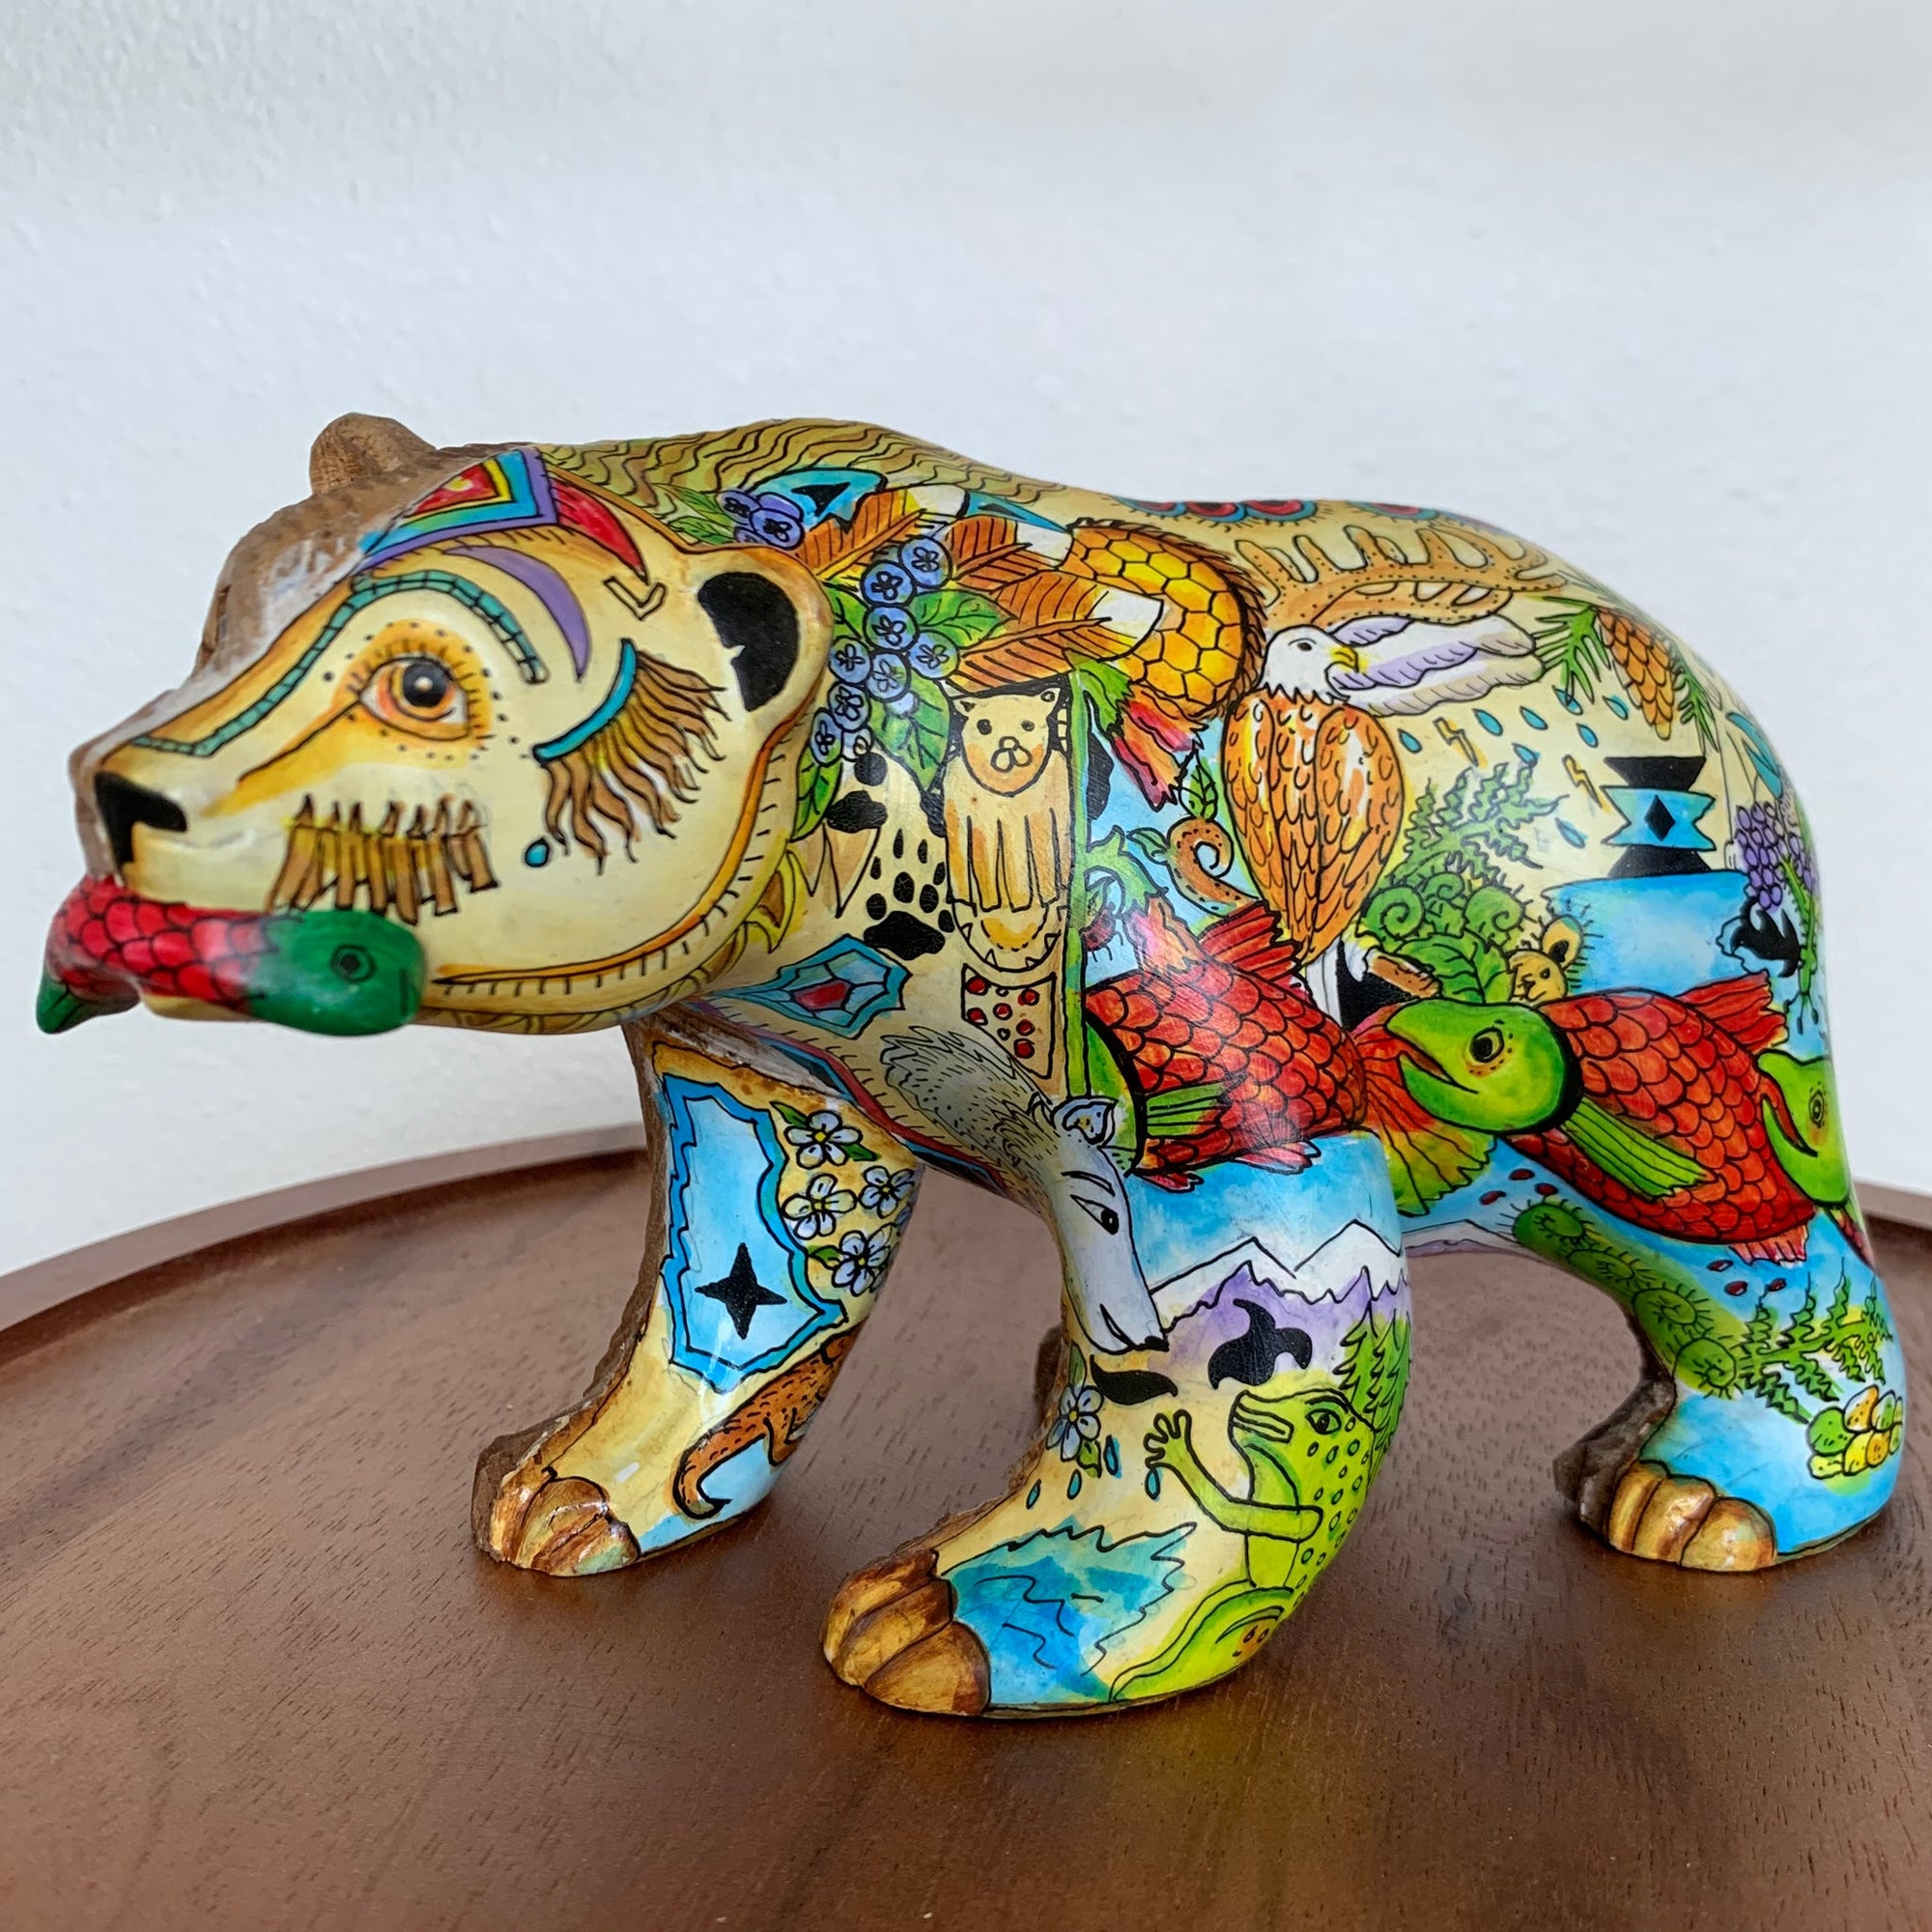 3D Bear Carving by Sue Coccia